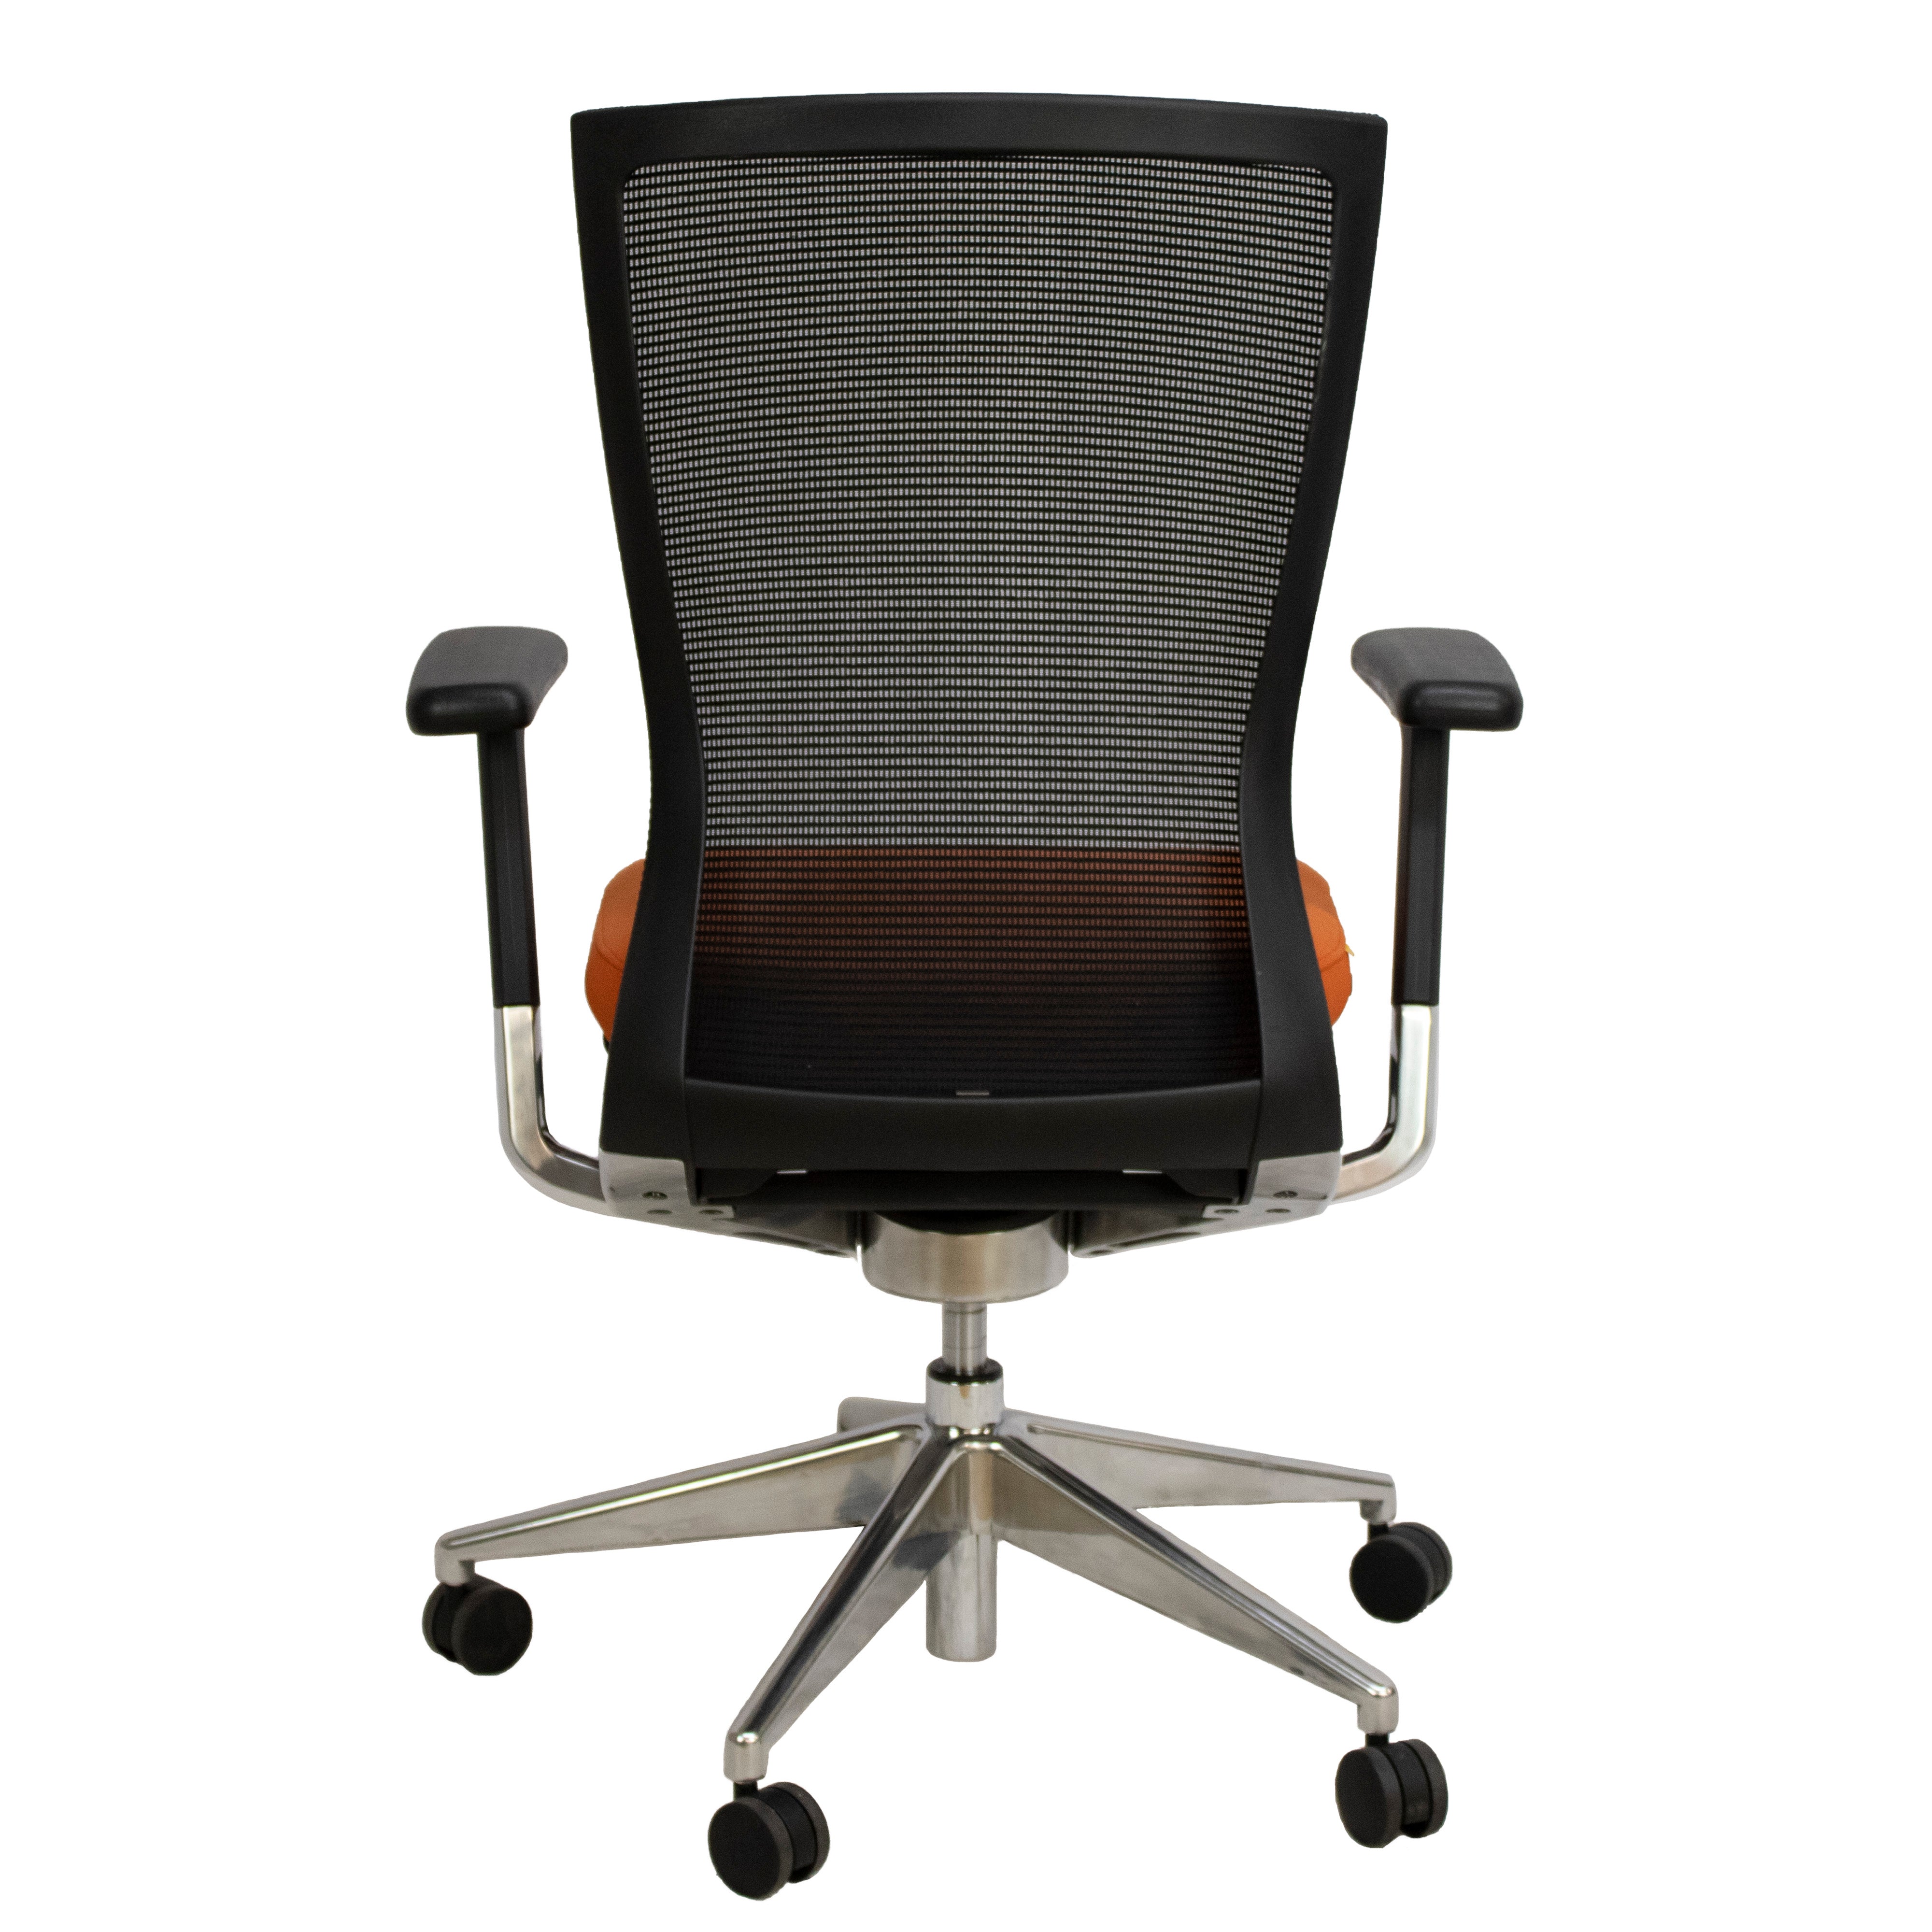 iDesk Oroblanco Task Chair - New CLOSEOUT